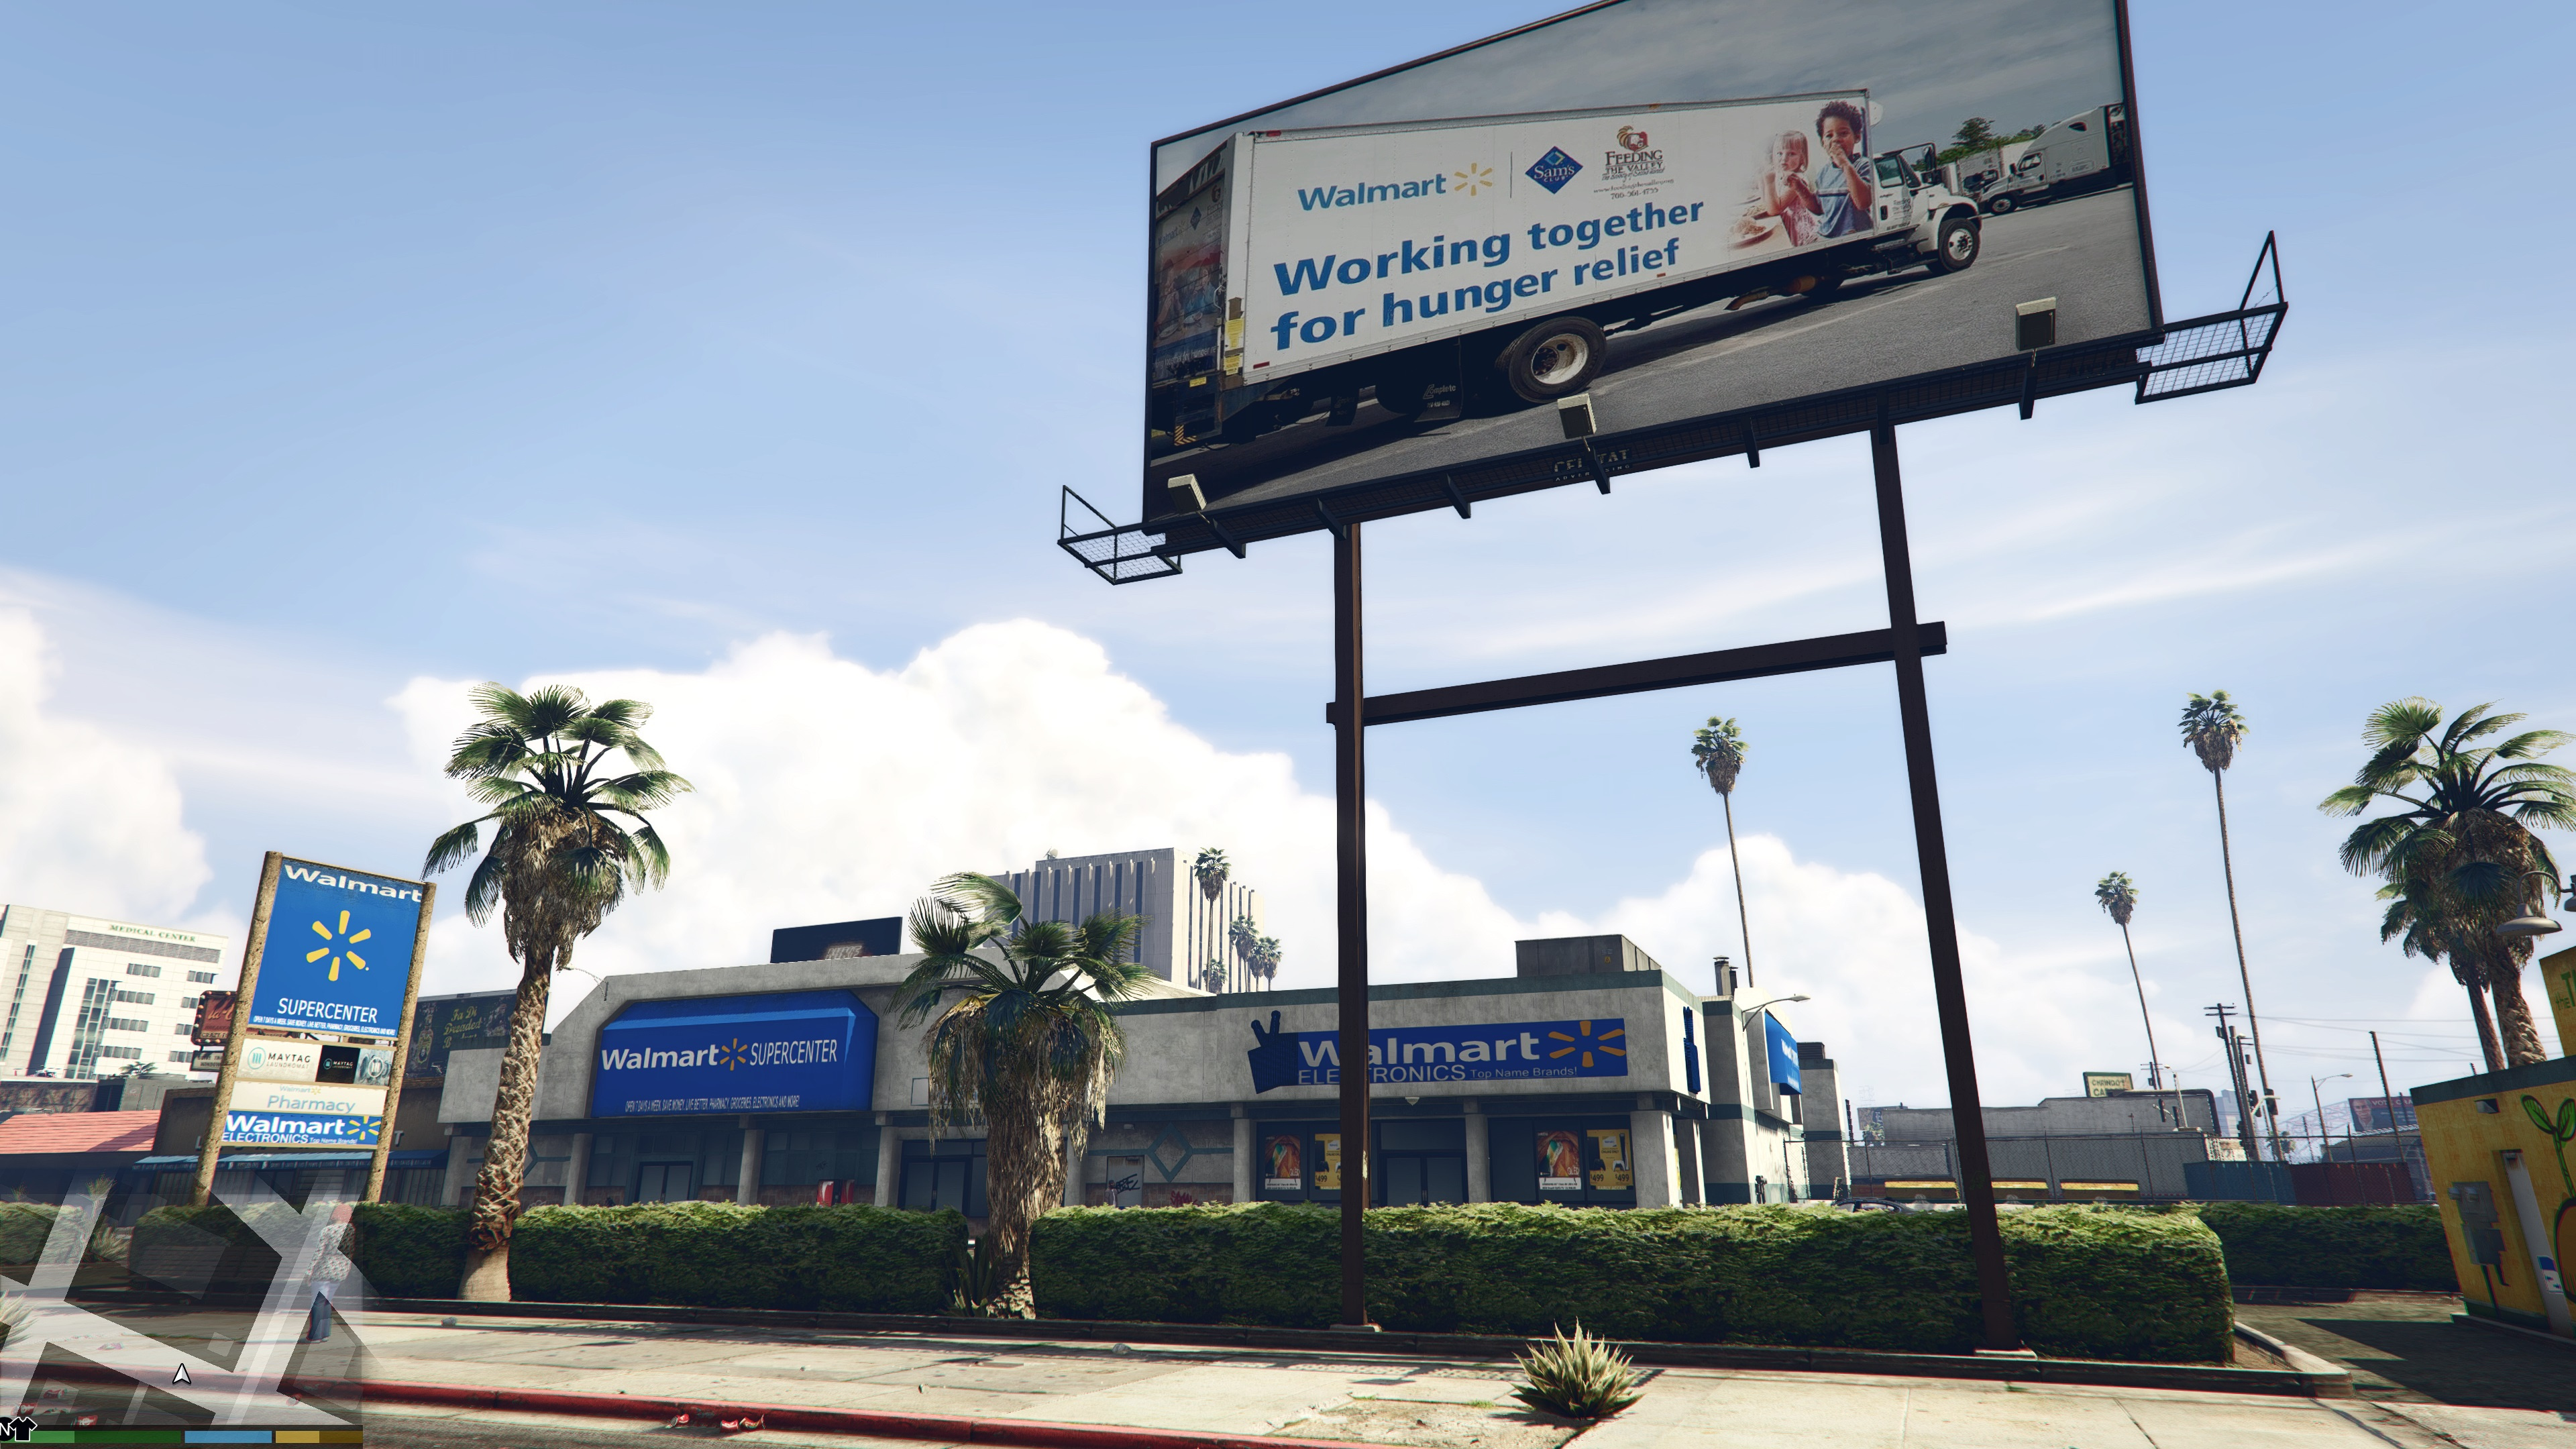 Walmart: GTA 5, A well-known chain of hypermarkets, Opened in 1950. 3840x2160 4K Background.